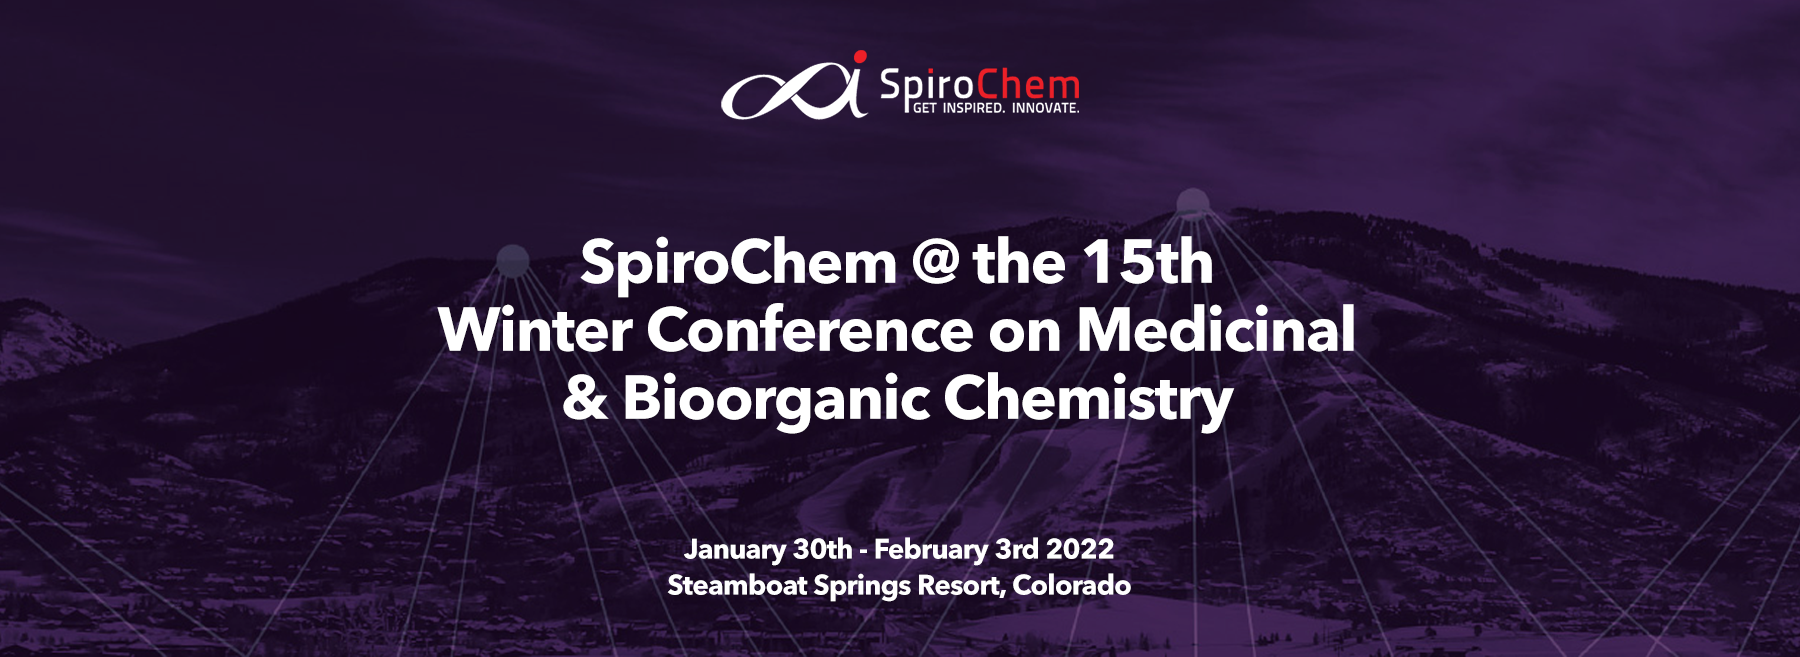 SpiroChem @ the 15th Winter Conference on Medicinal & Bioorganic Chemistry in Colorado